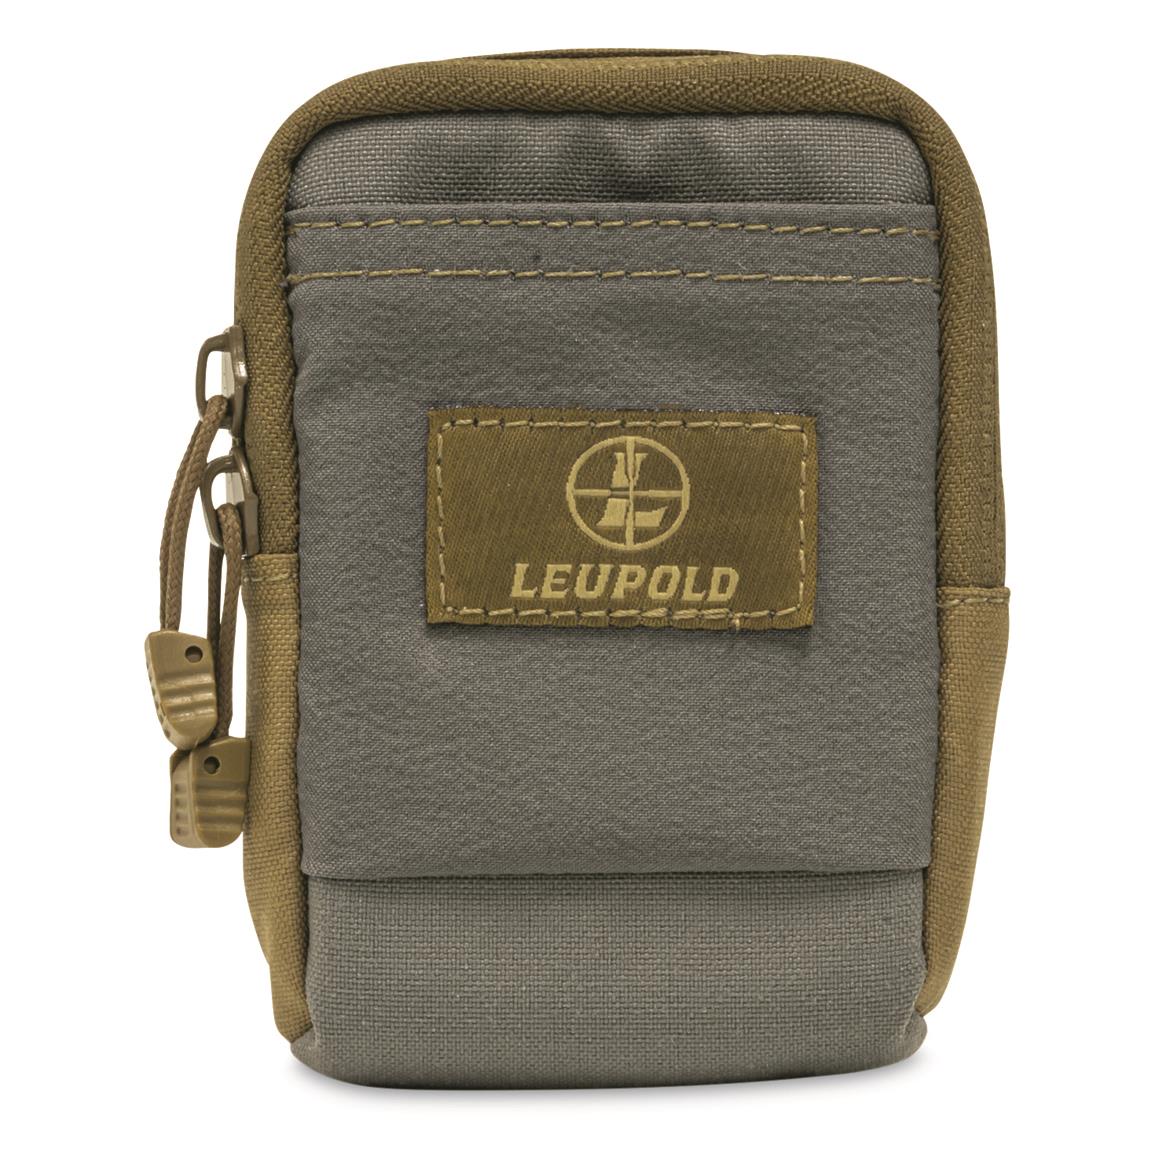 Leupold Pro Guide Zippered Accessory Pouch